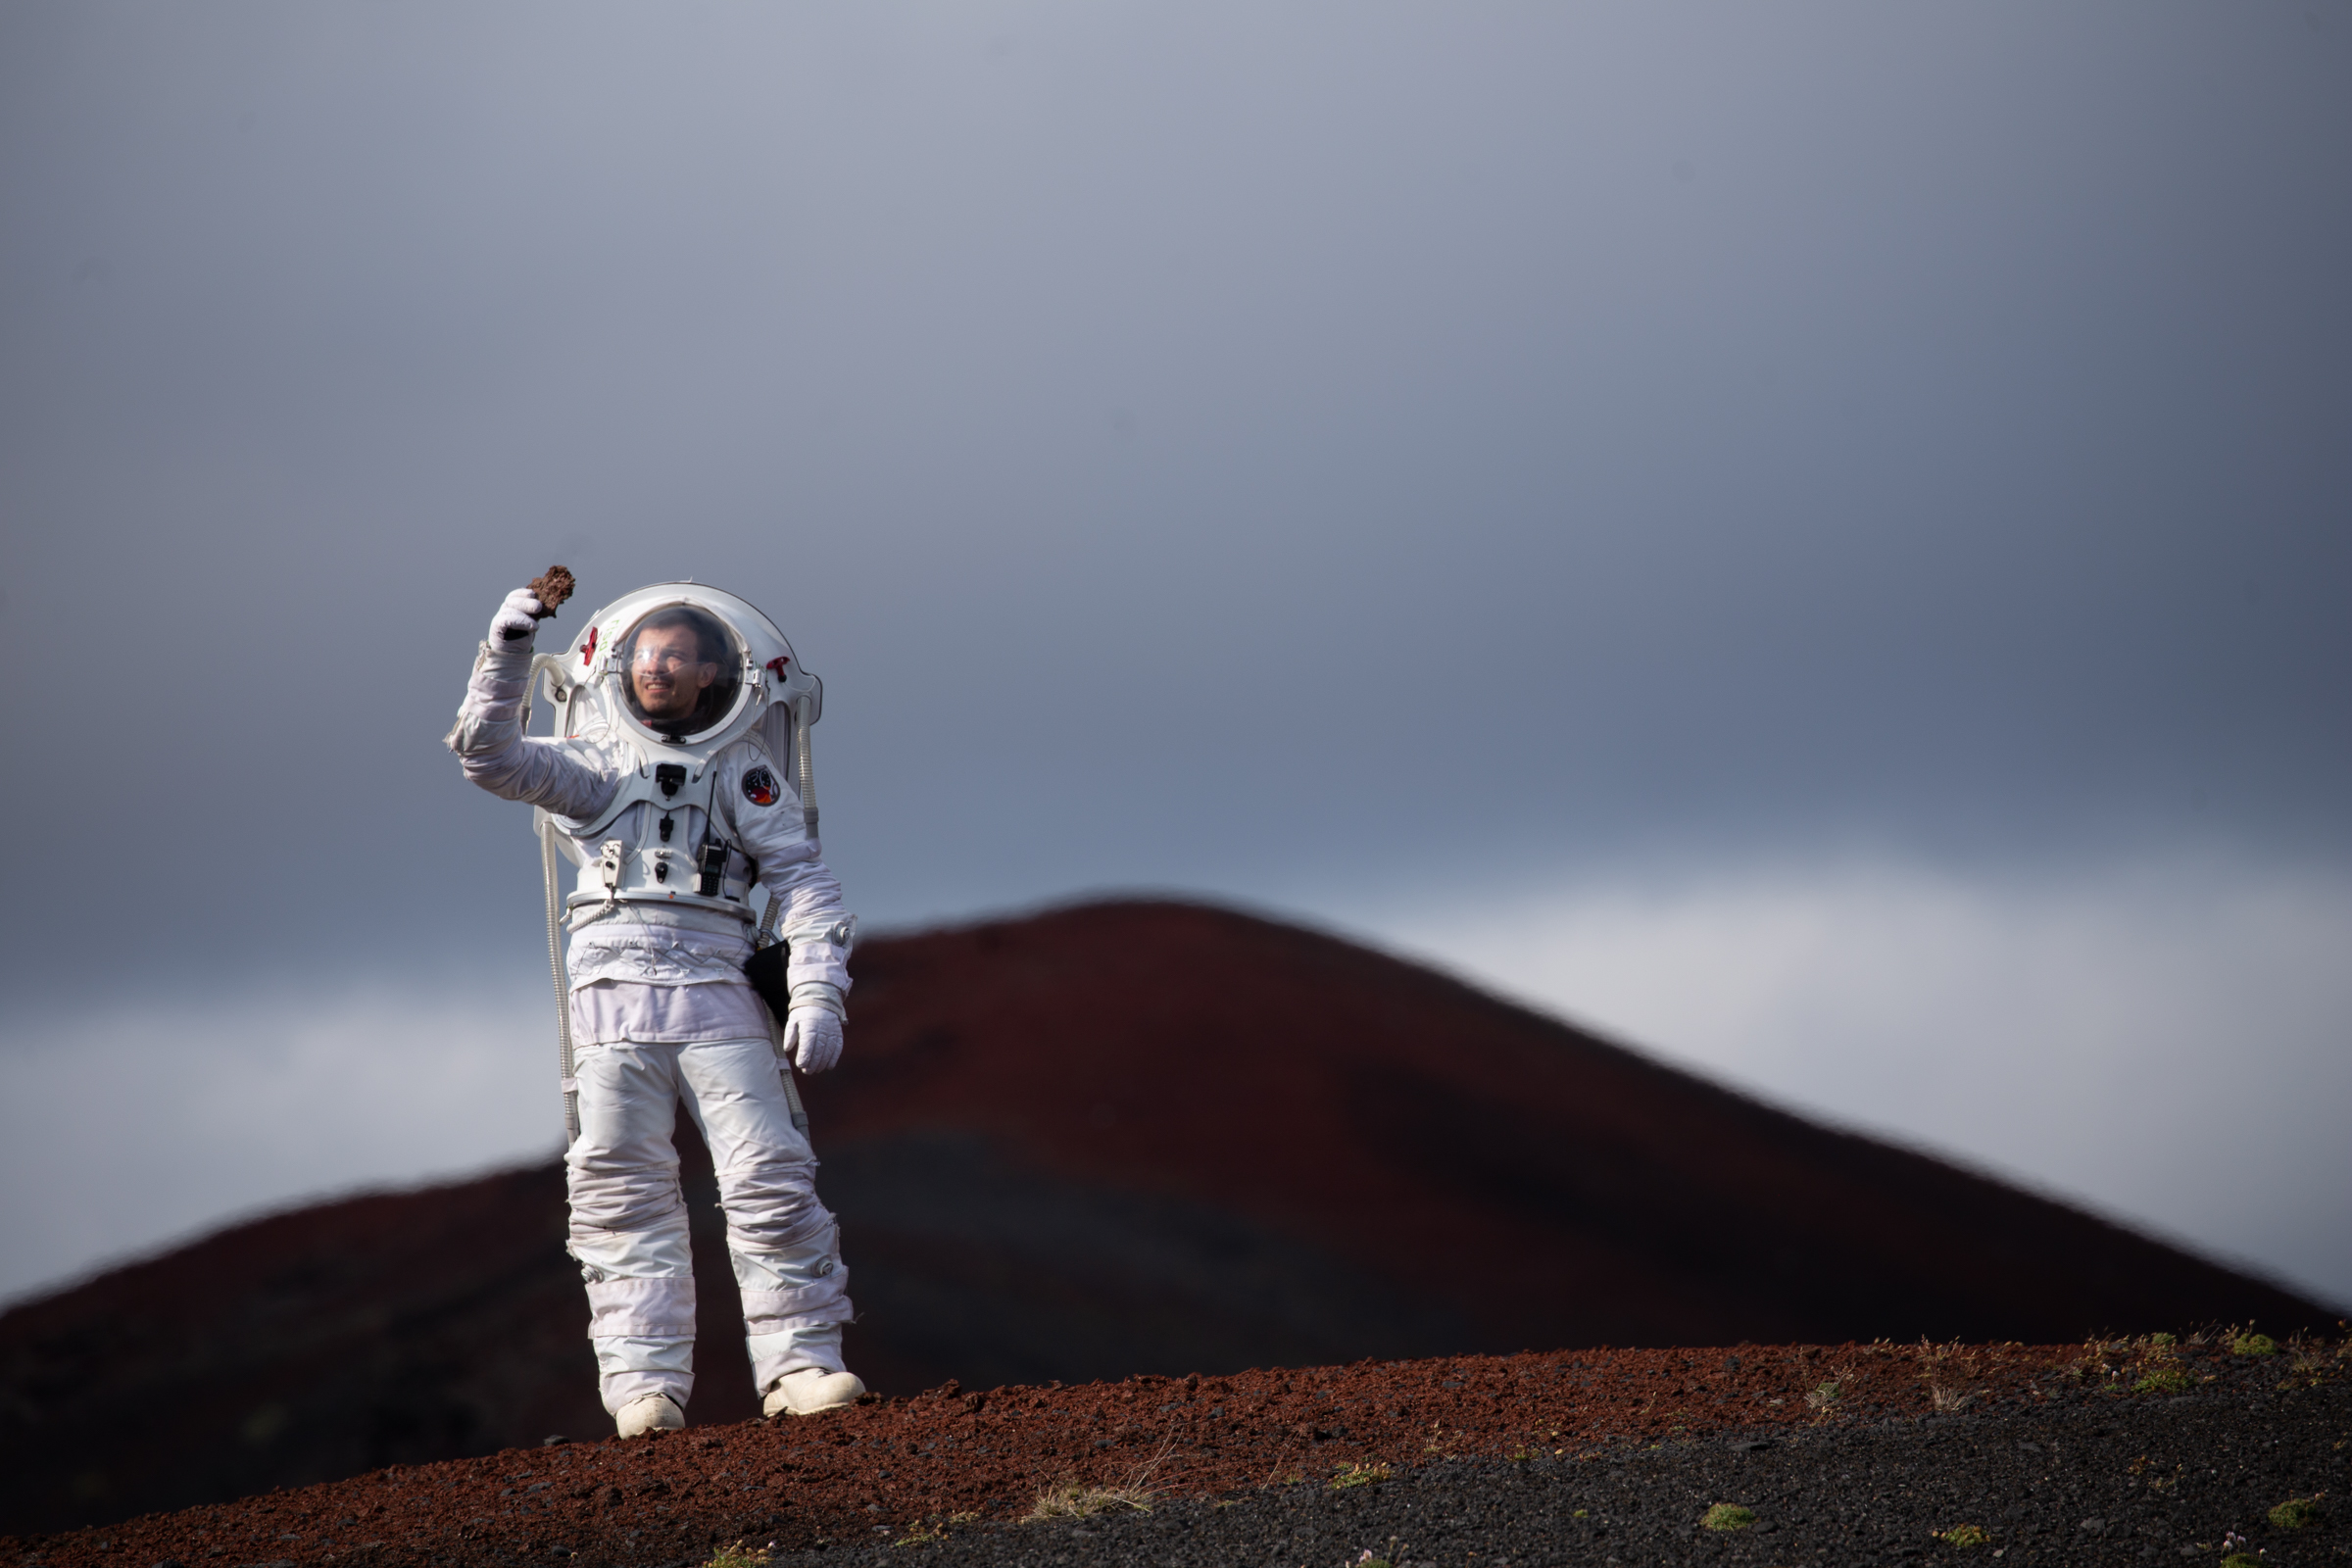 A researcher evaluates the MS1 suit in Iceland to inform development of an Artemis generation MS2 moon and Mars analog spacesuit. The MS1 was designed by the Rhode Island School of Design with input from NASA and its Johnson Space Center.